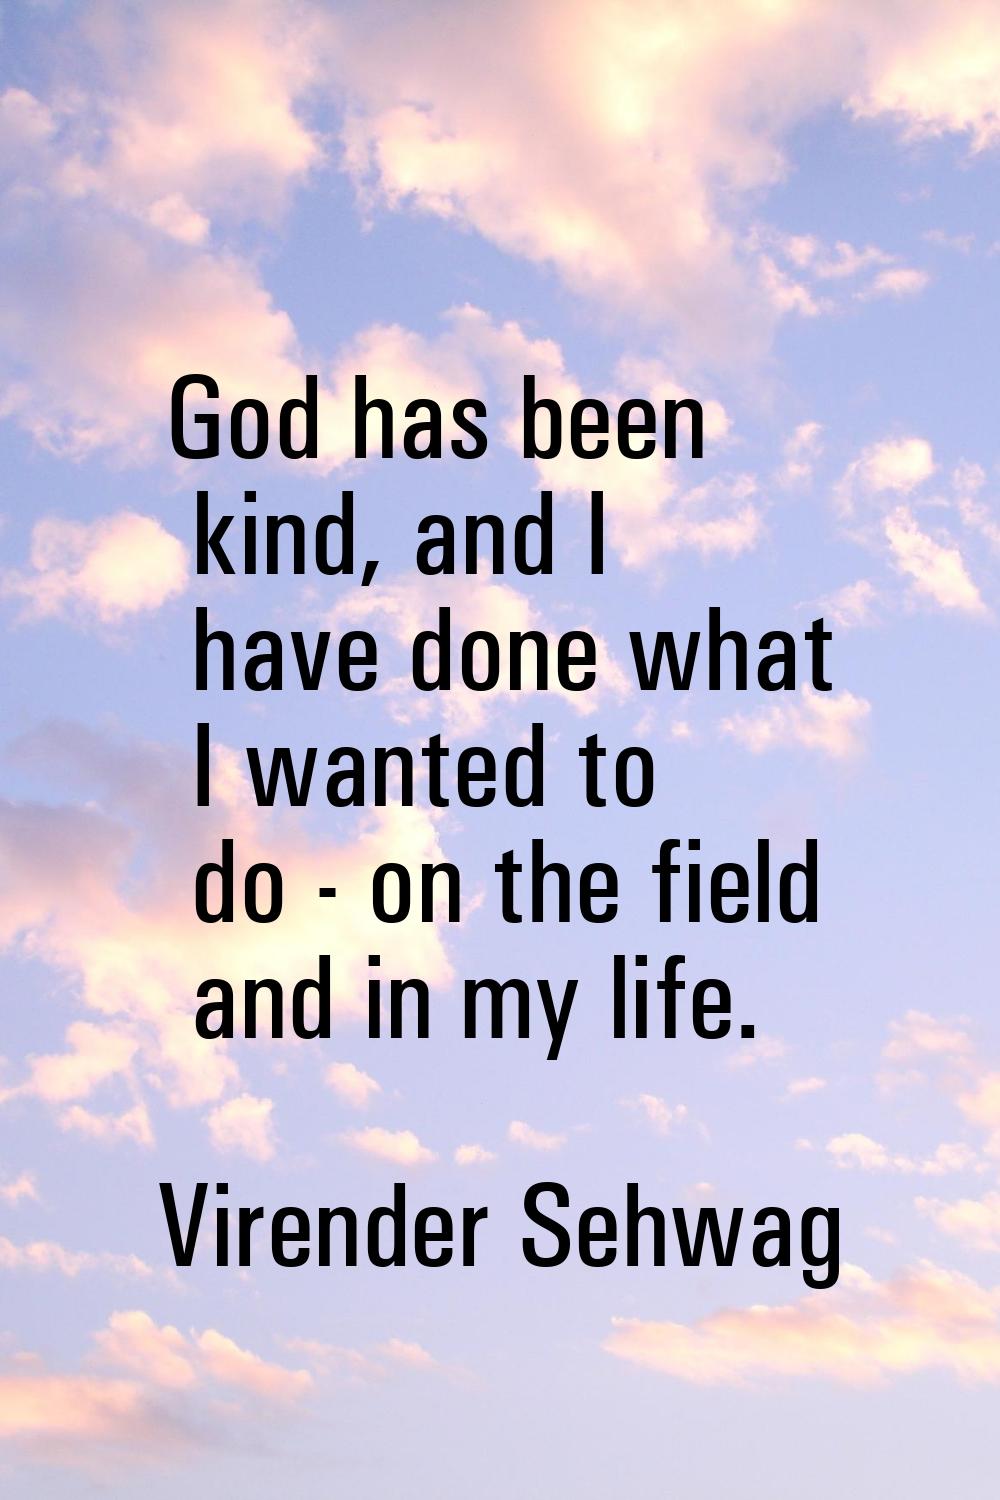 God has been kind, and I have done what I wanted to do - on the field and in my life.